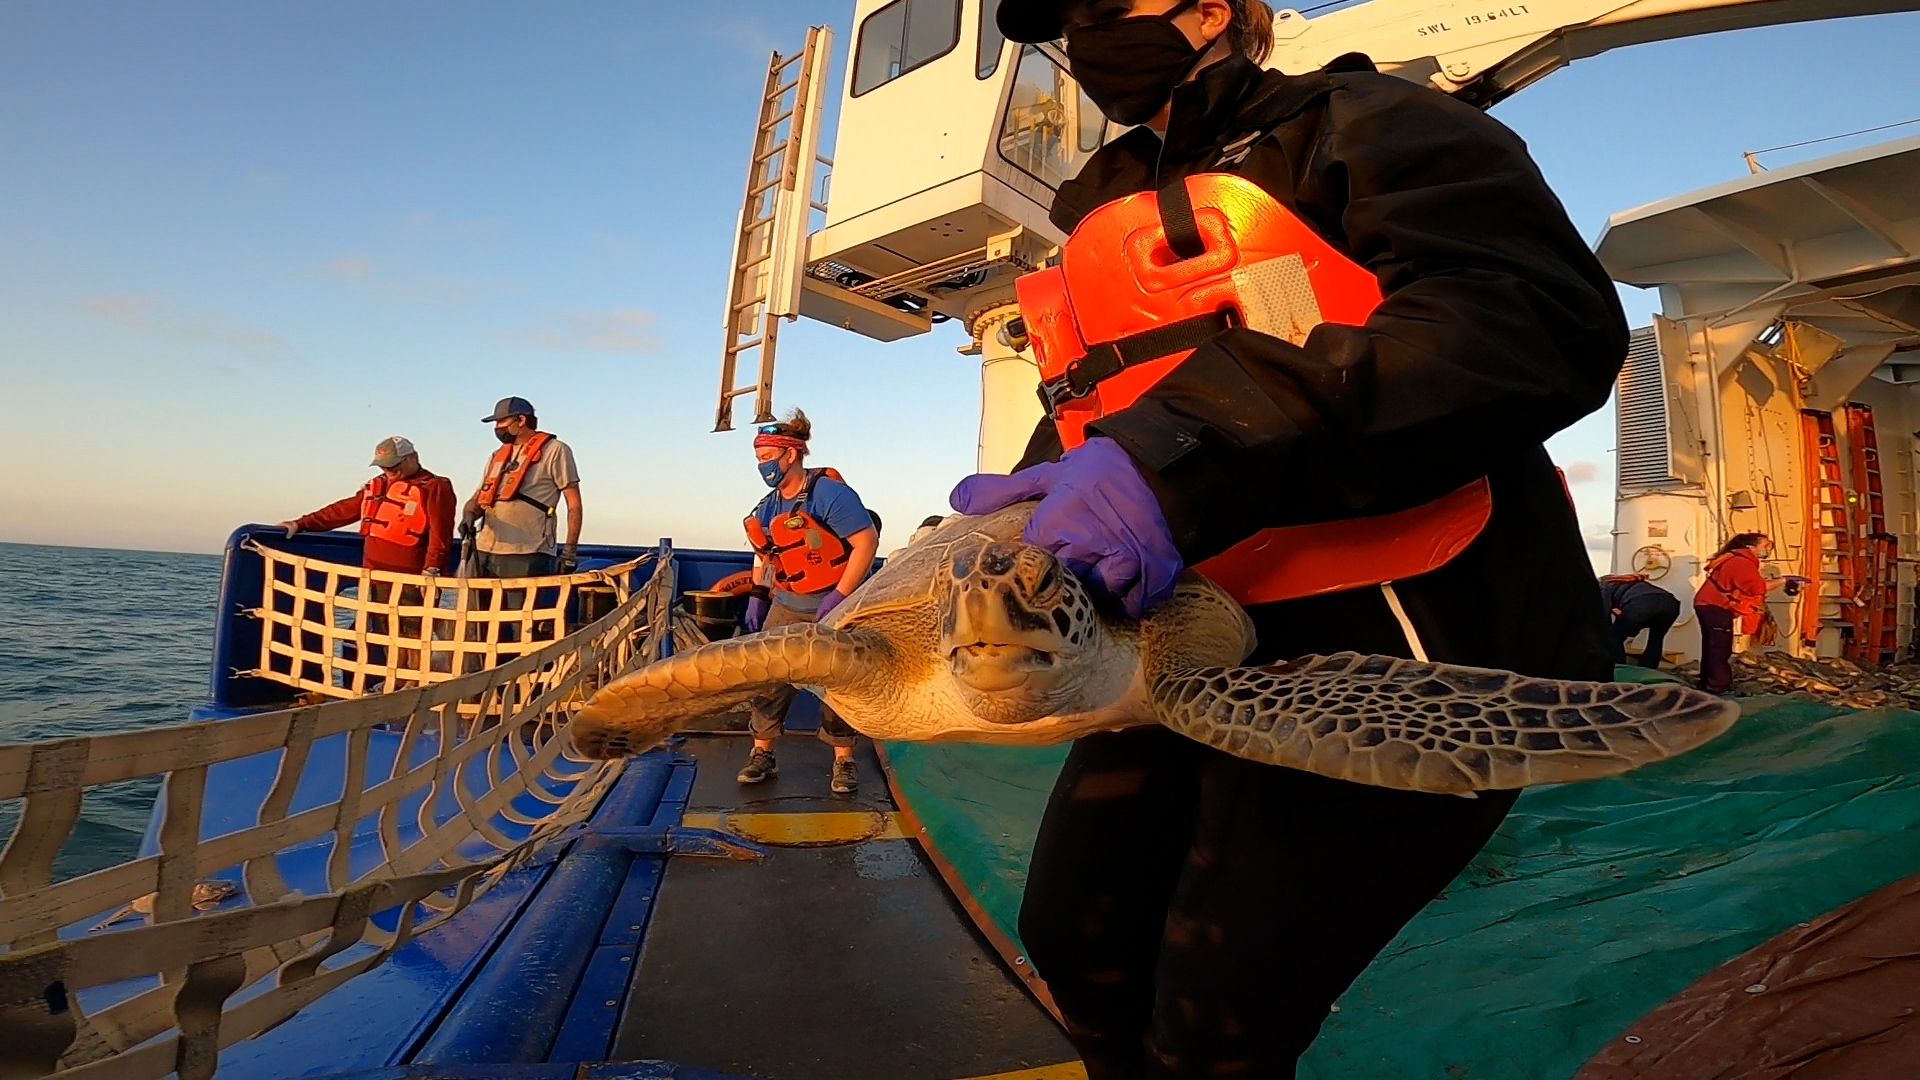 Wildlife rescue team members return rescued sea turtles to their natural habitat, the Gulf of Mexico